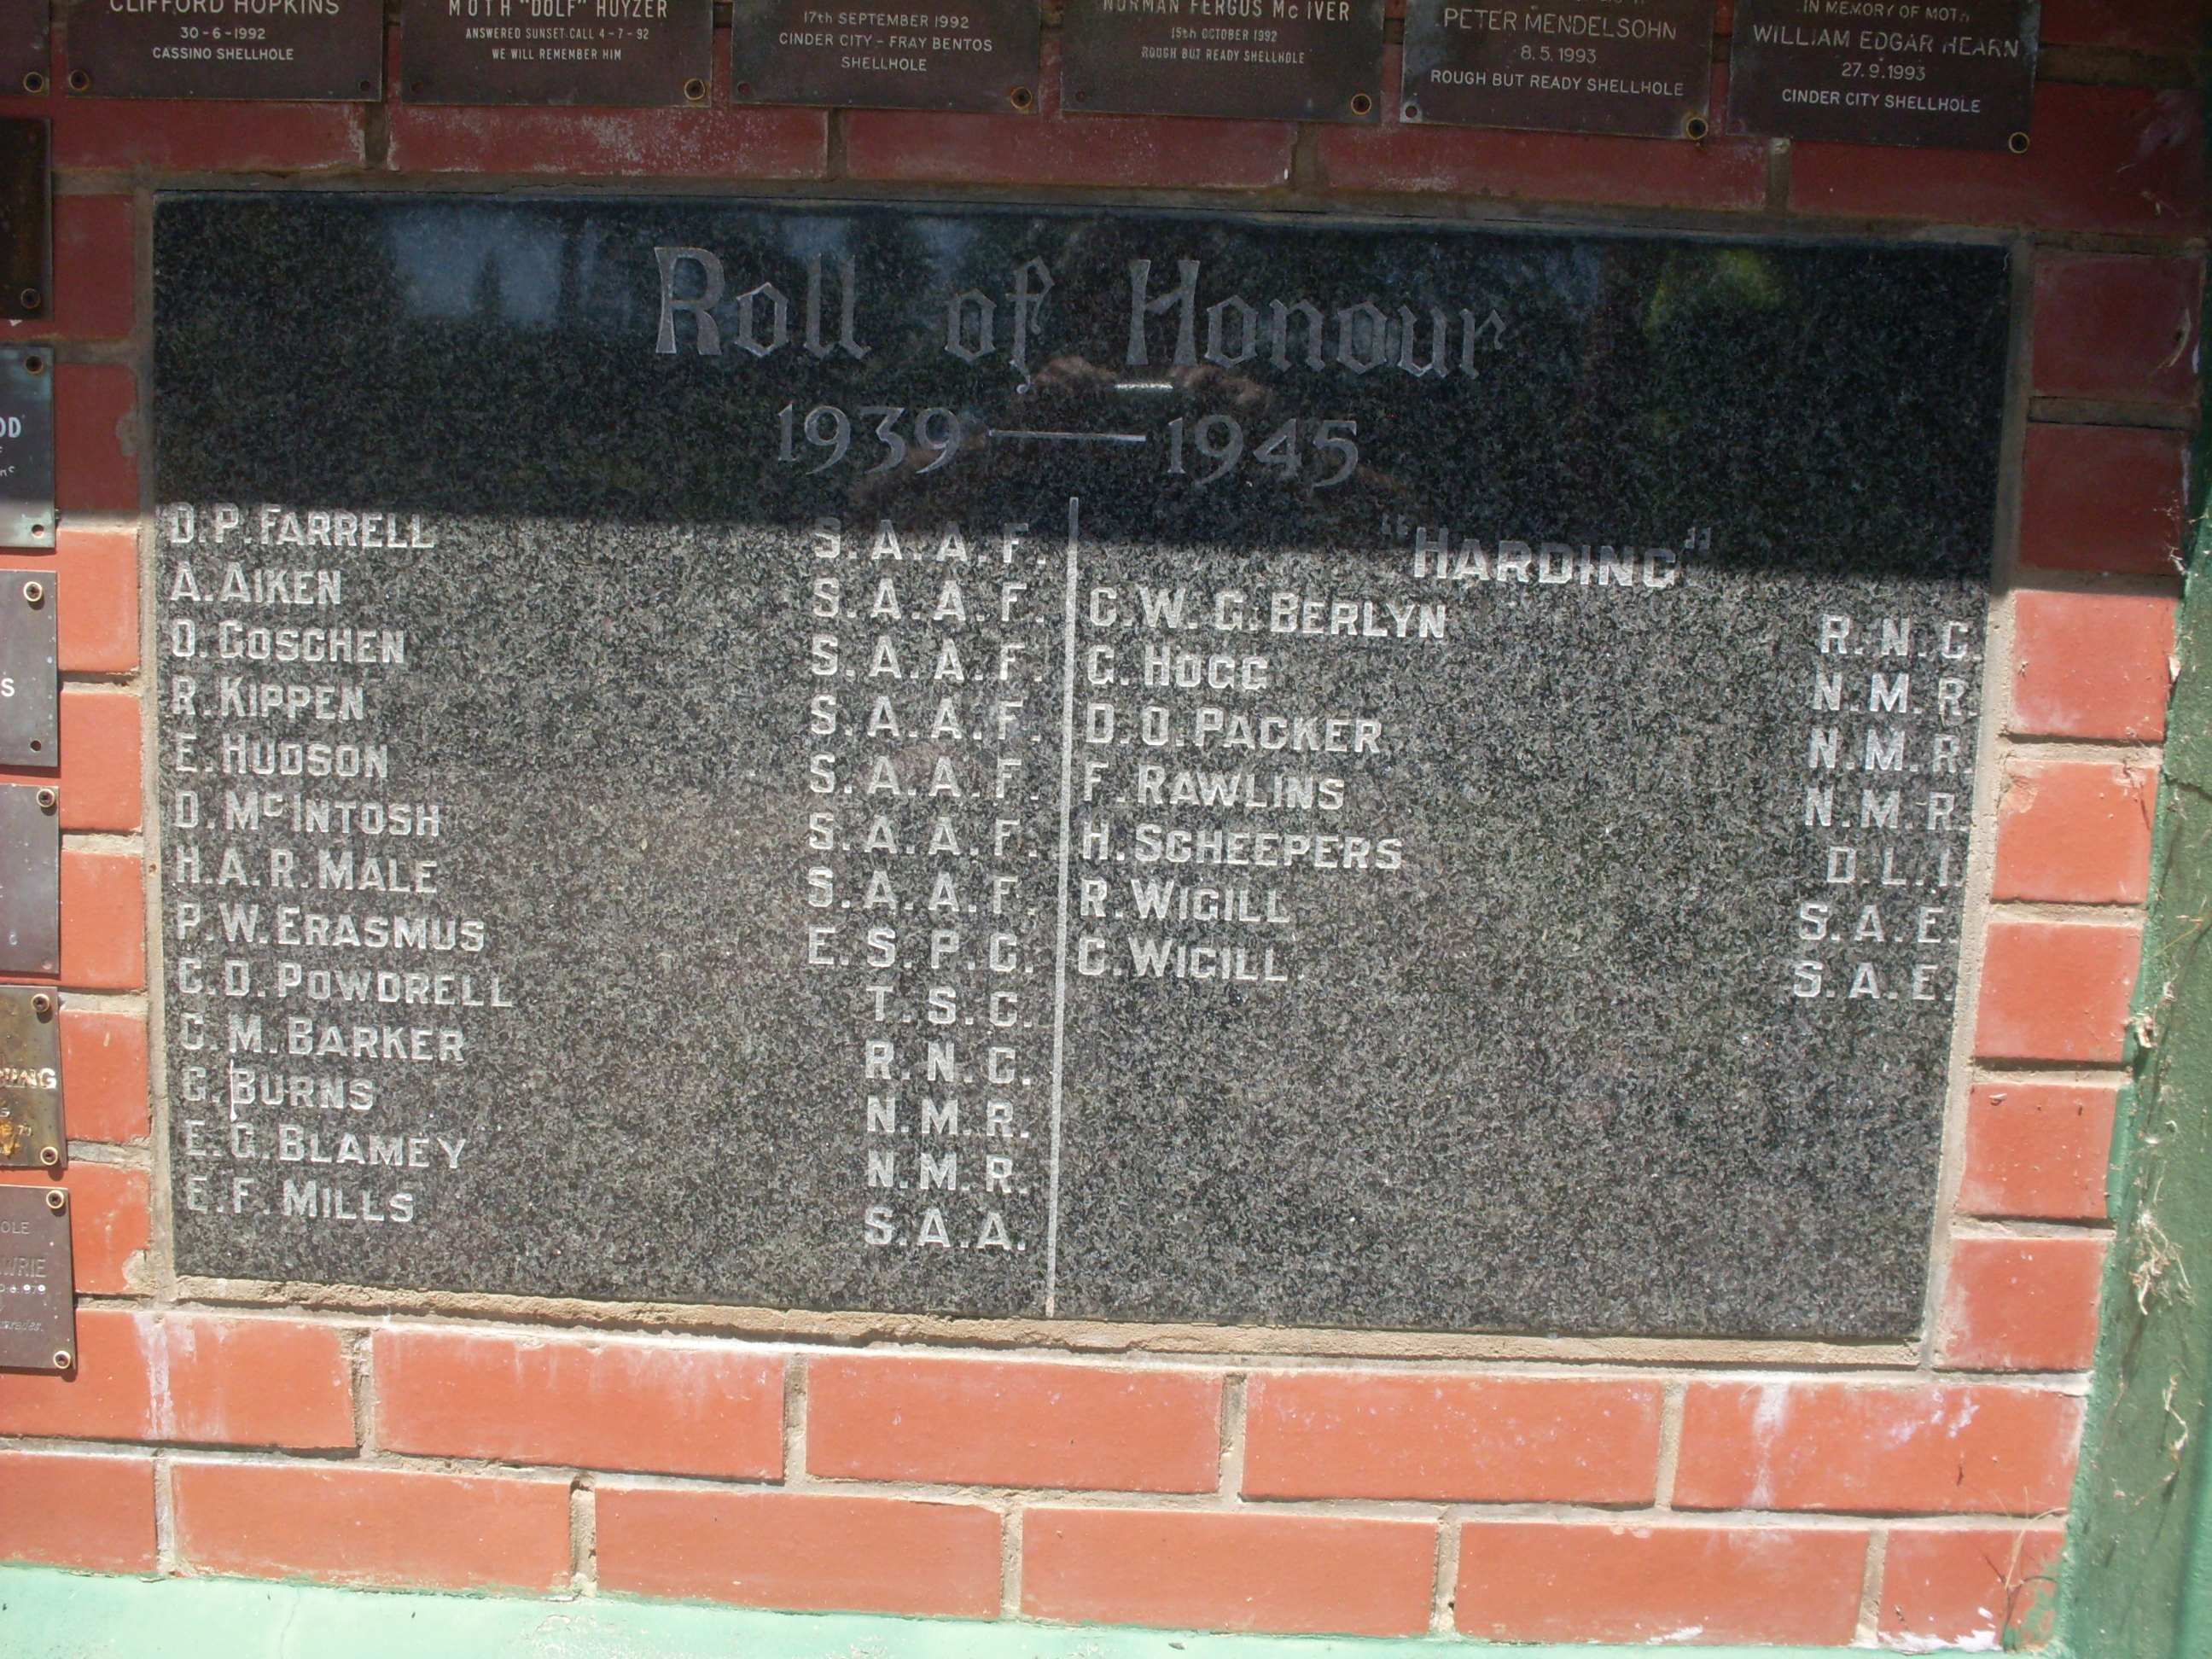 08. Roll of Honour 1939-1945